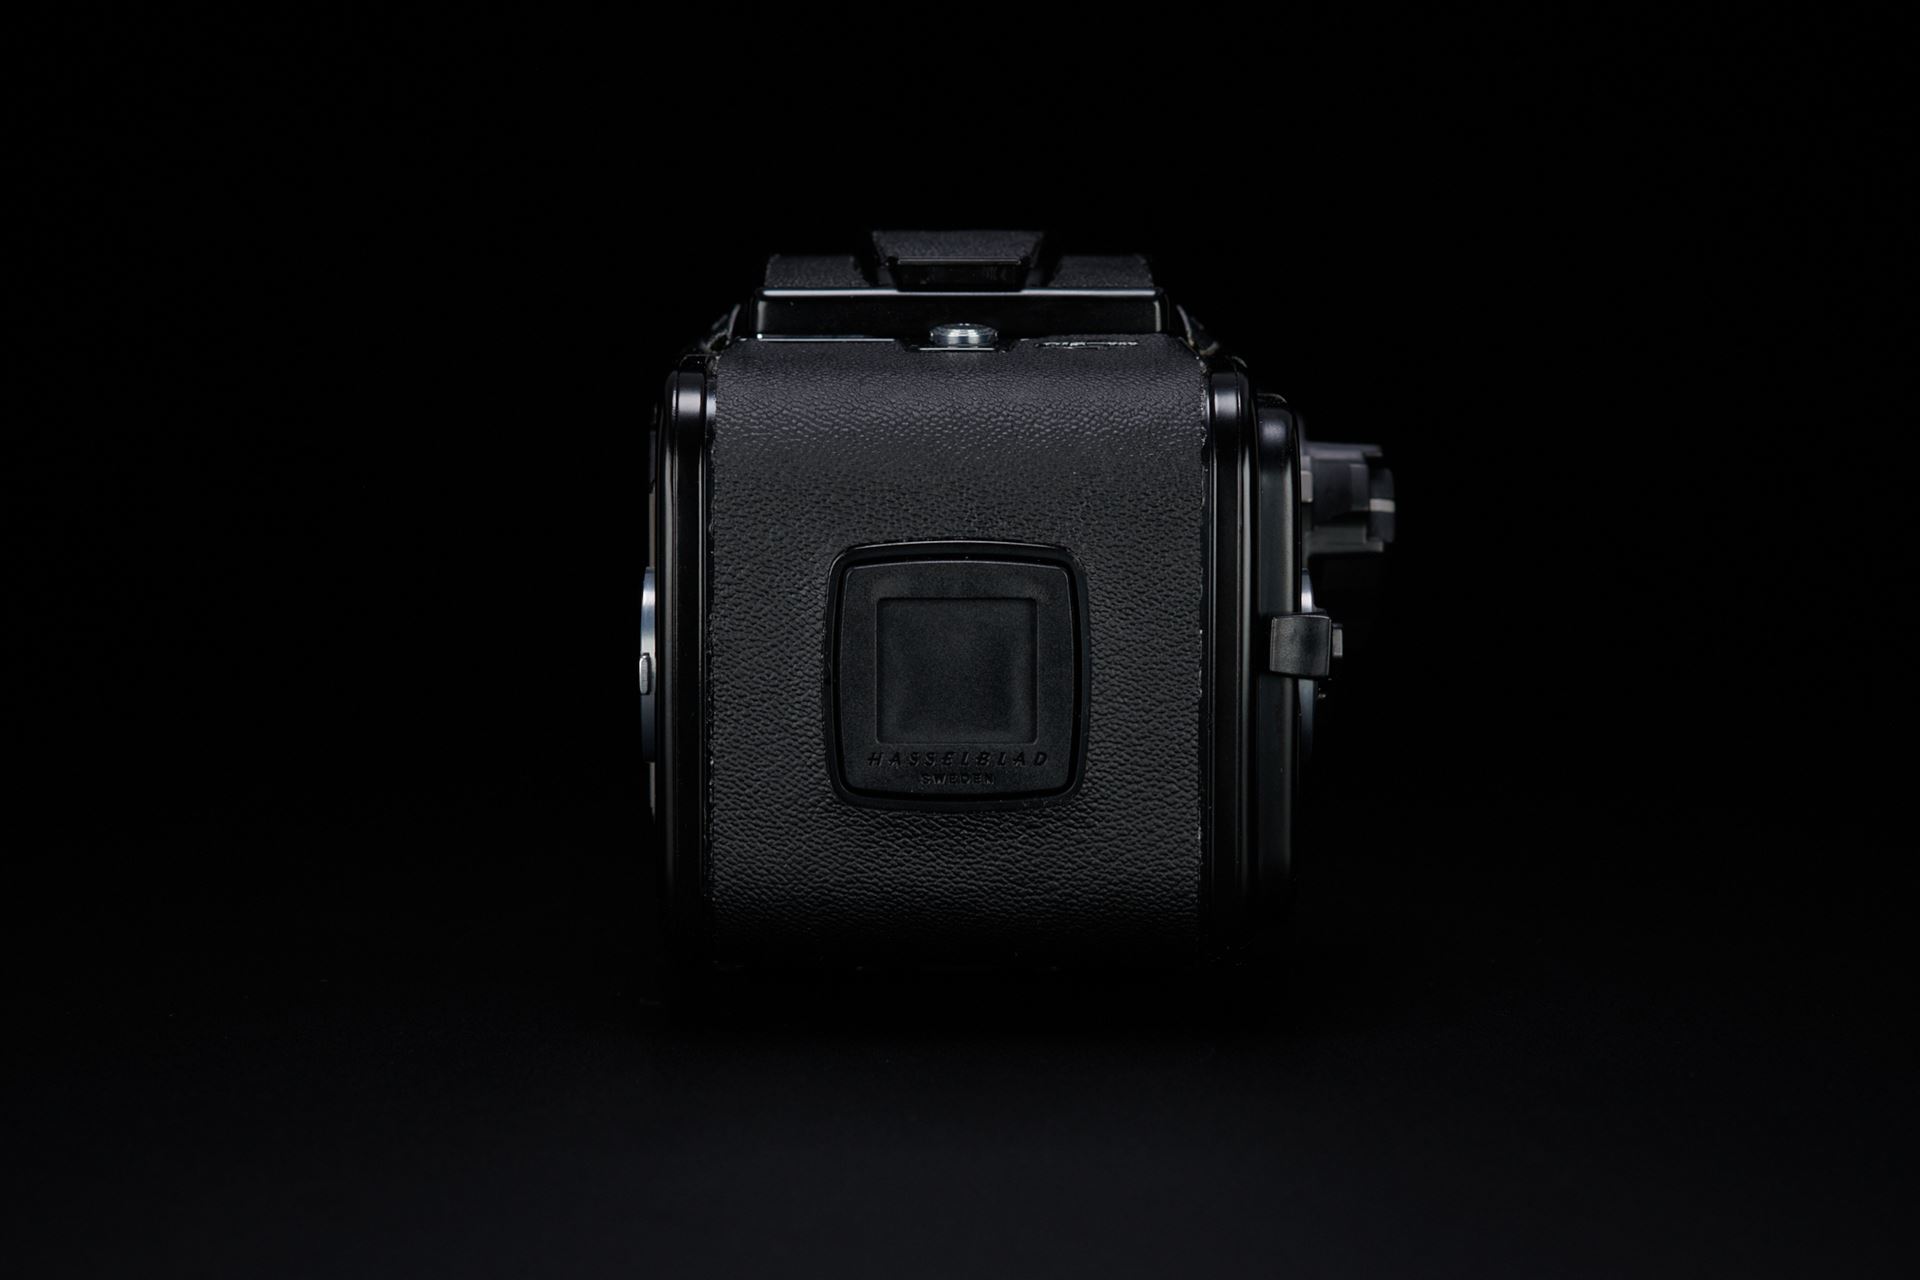 Picture of hasselblad 503 cxi w/ planar 80mm f/2.8